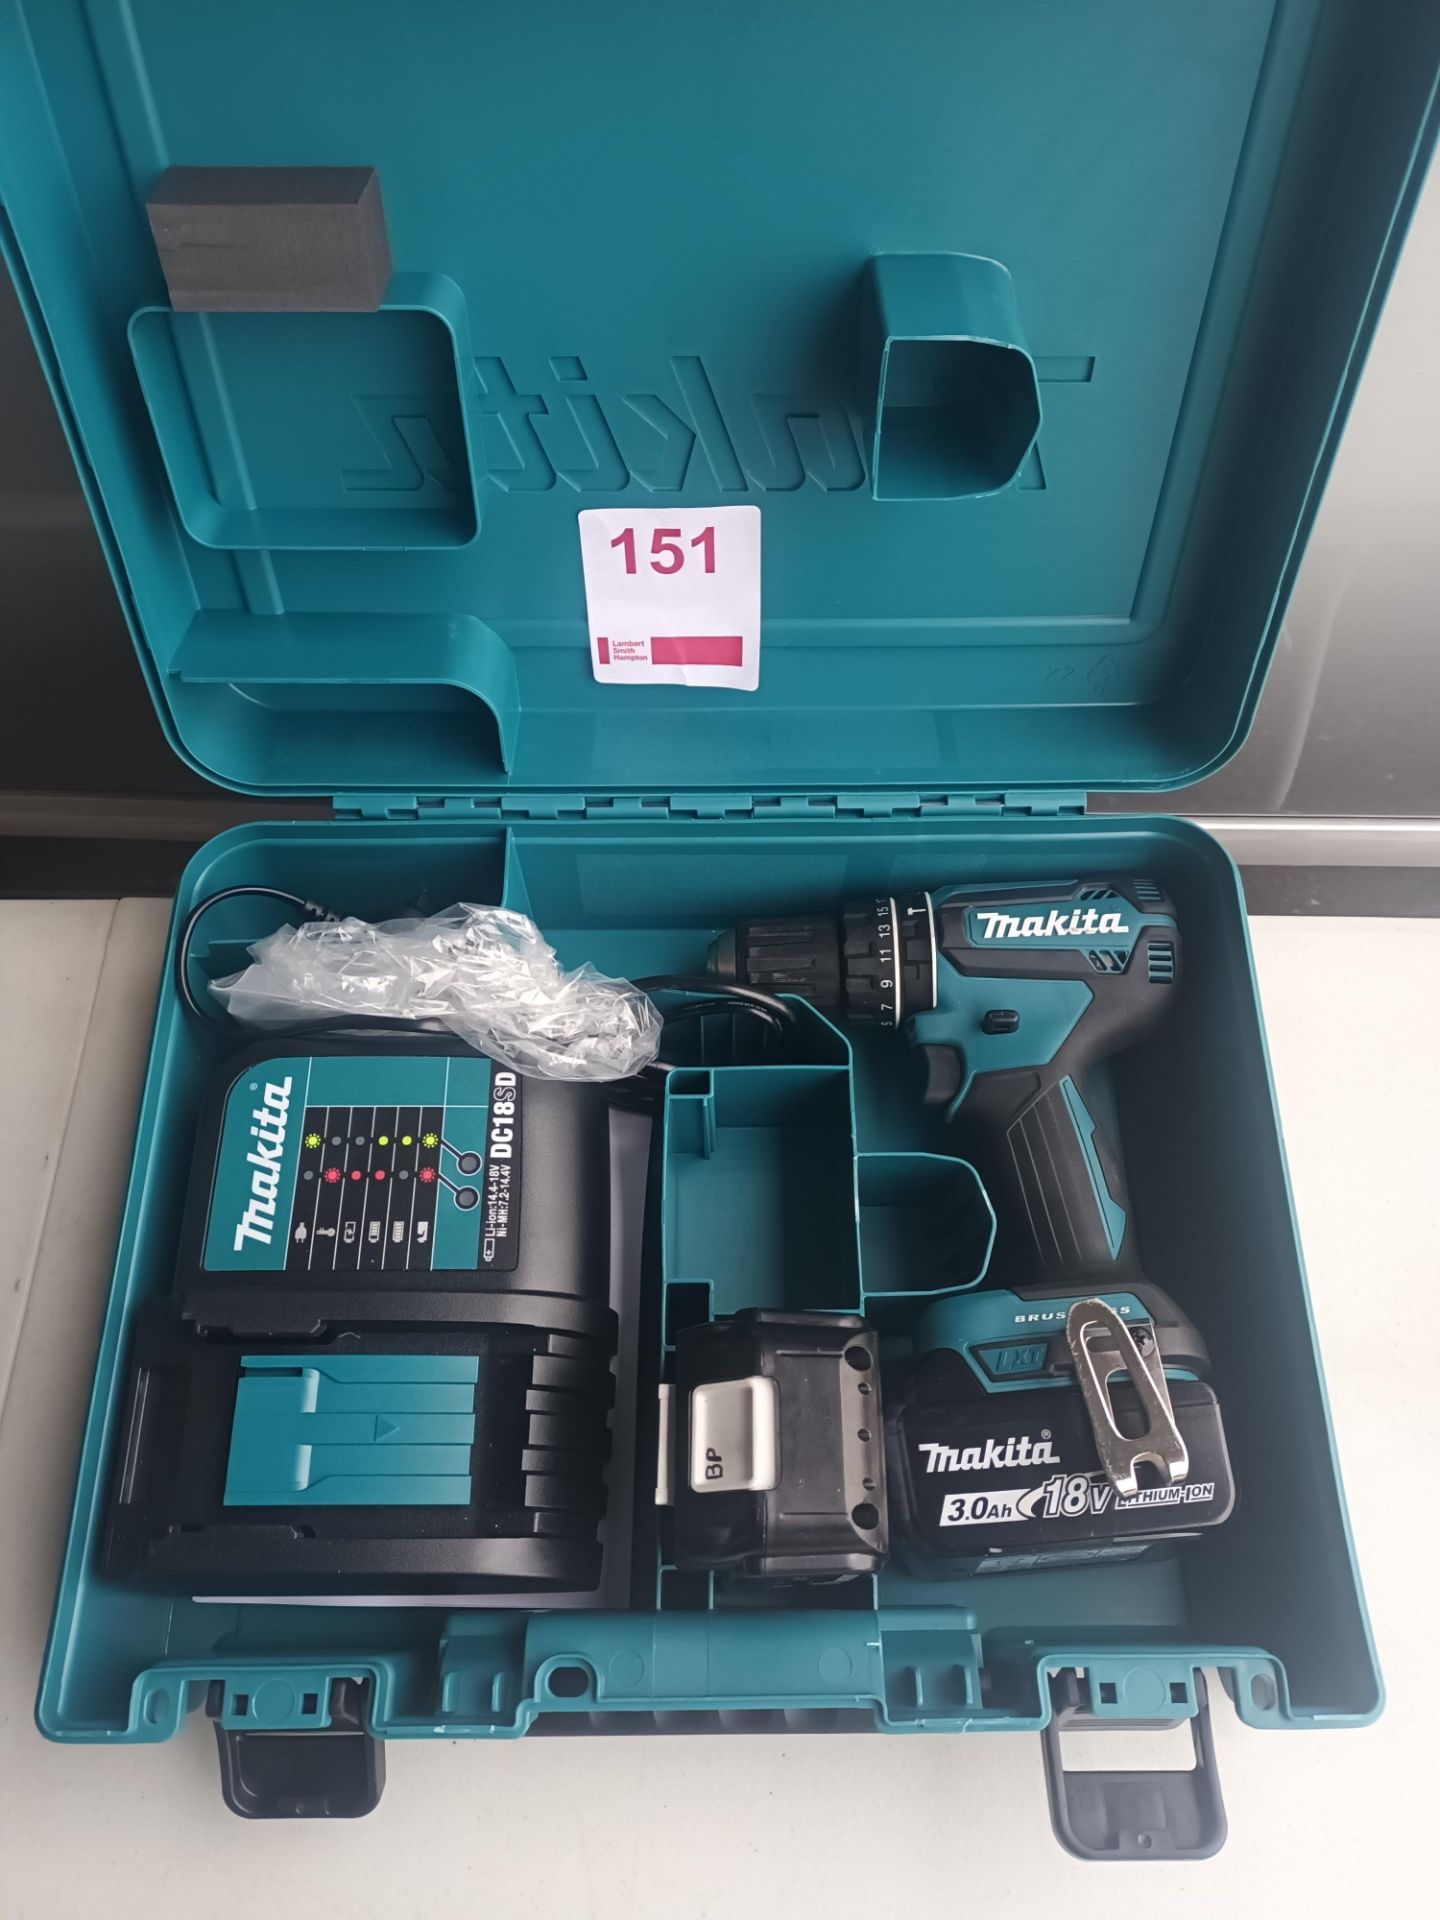 Makita DHP485 18V LXT Li-ion Brushless Combi Drillwith spare battery and charger (Located Upminster)